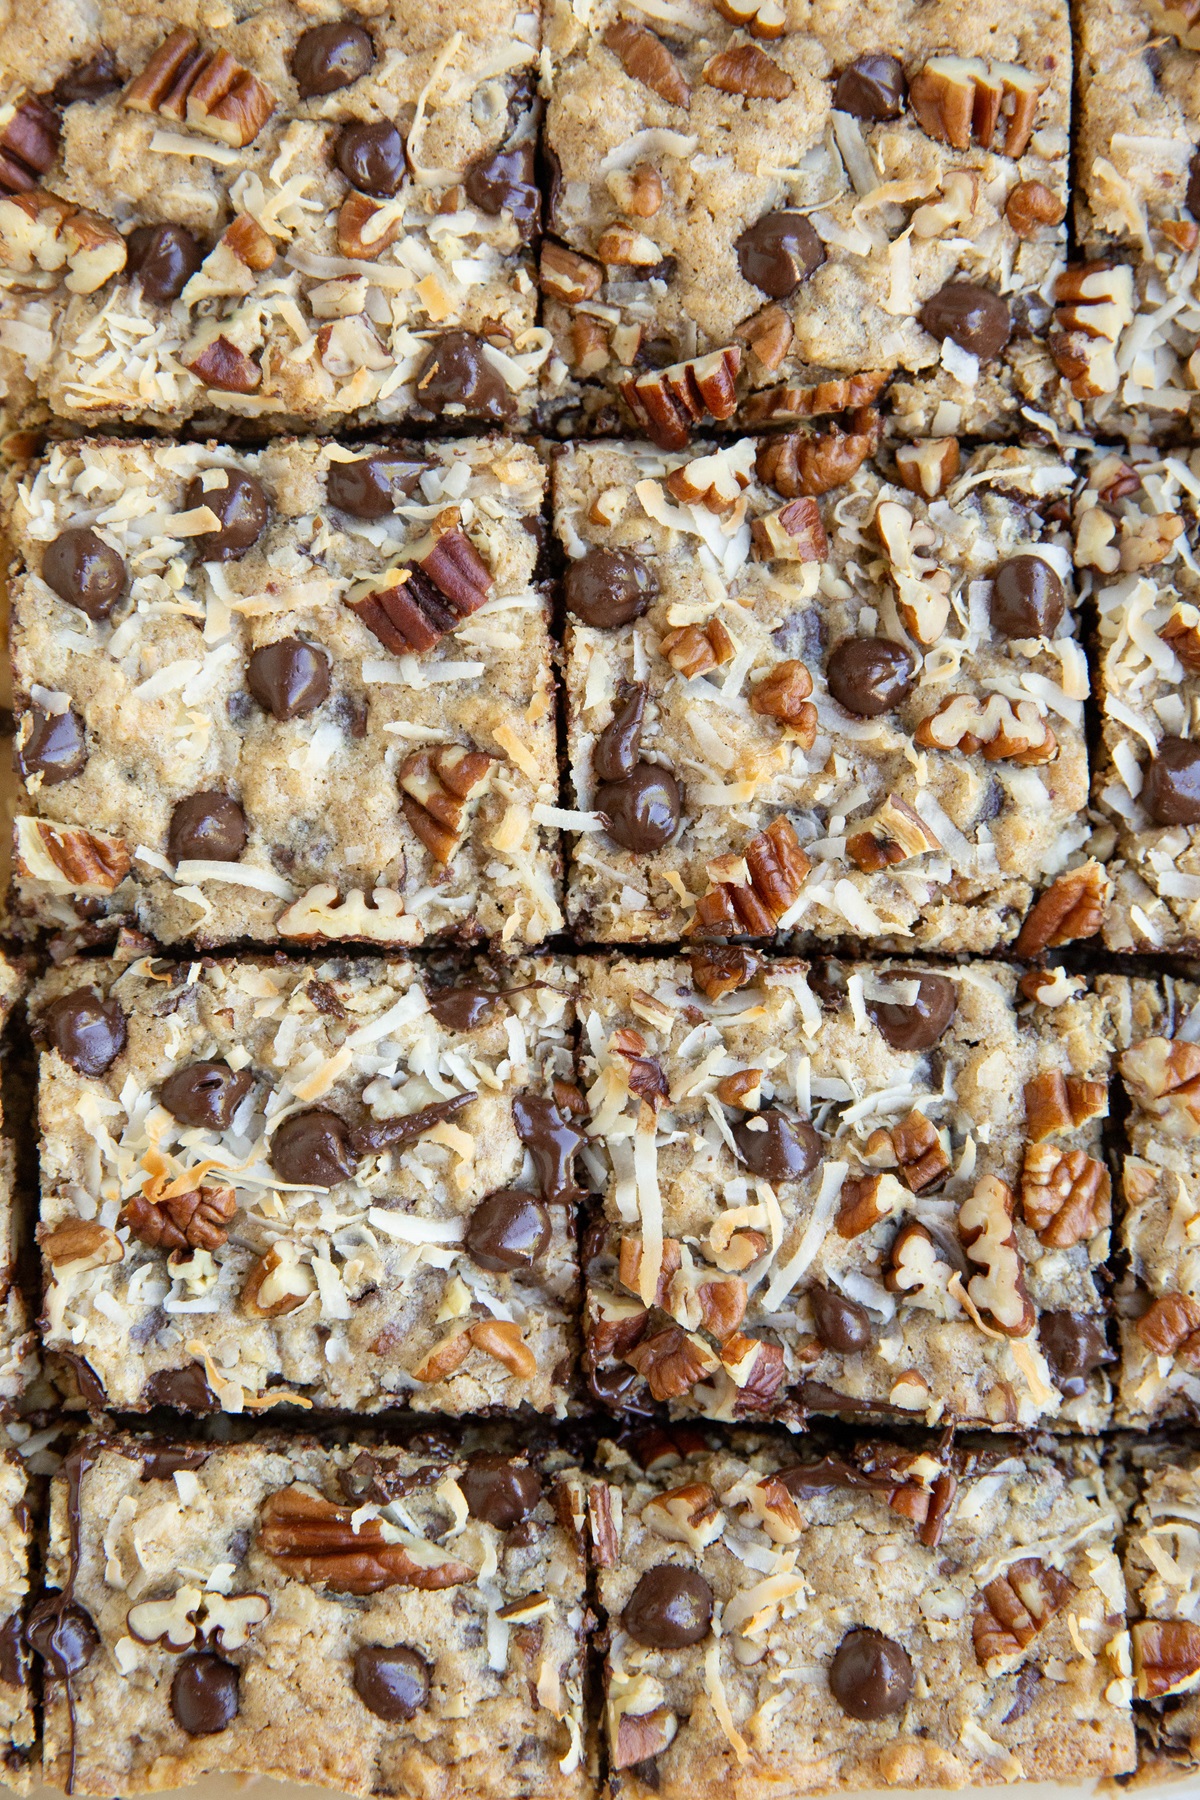 Cookie bars cut into individual squares. Still gooey and fresh out of the oven and ready to serve.